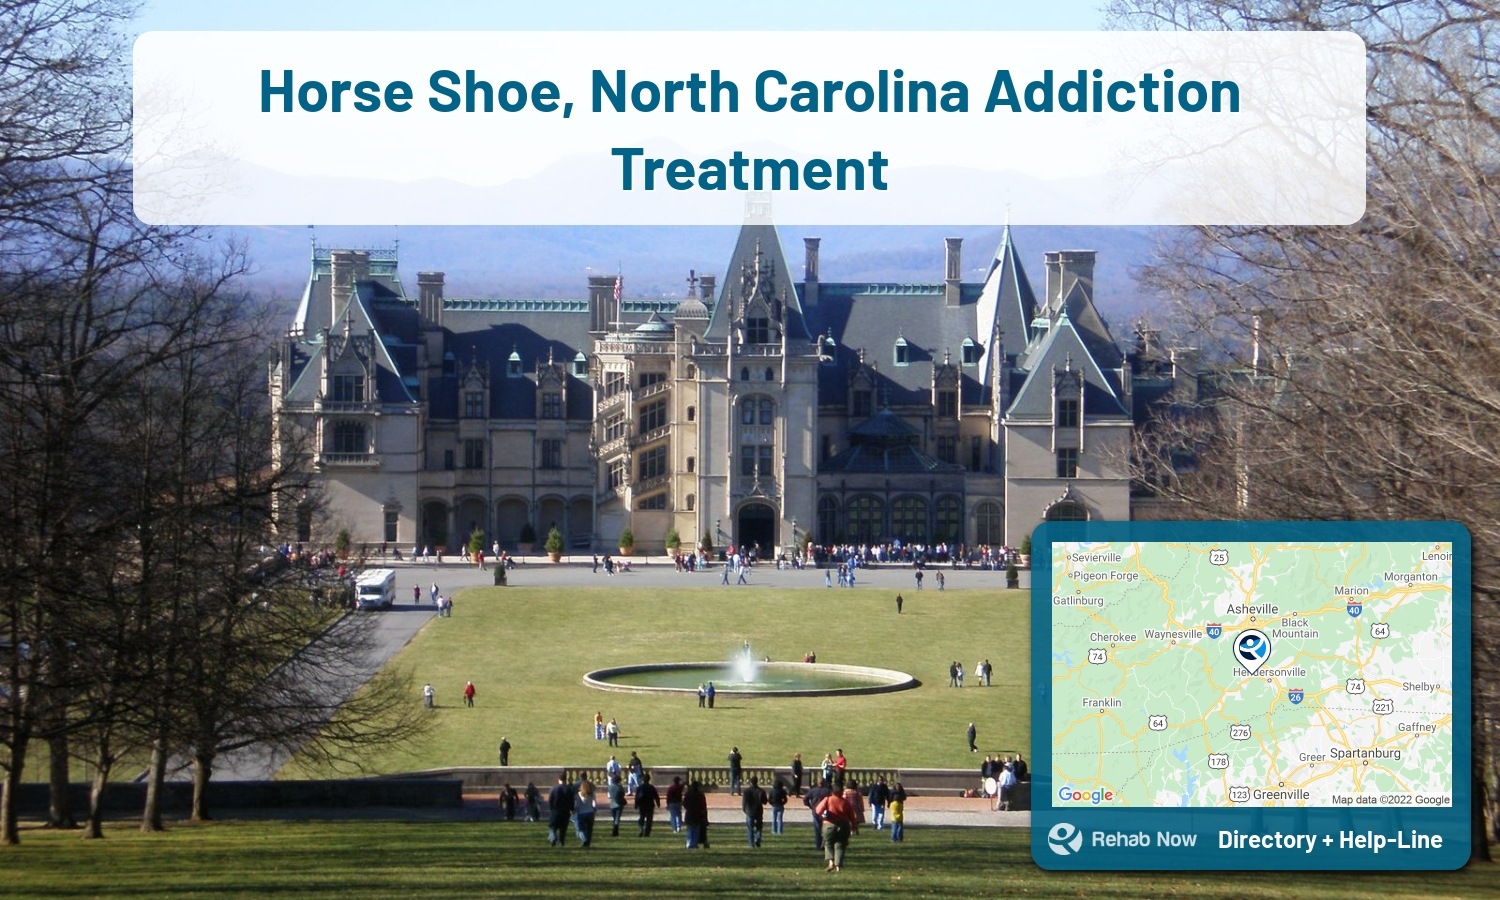 Find drug rehab and alcohol treatment services in Horse Shoe. Our experts help you find a center in Horse Shoe, North Carolina